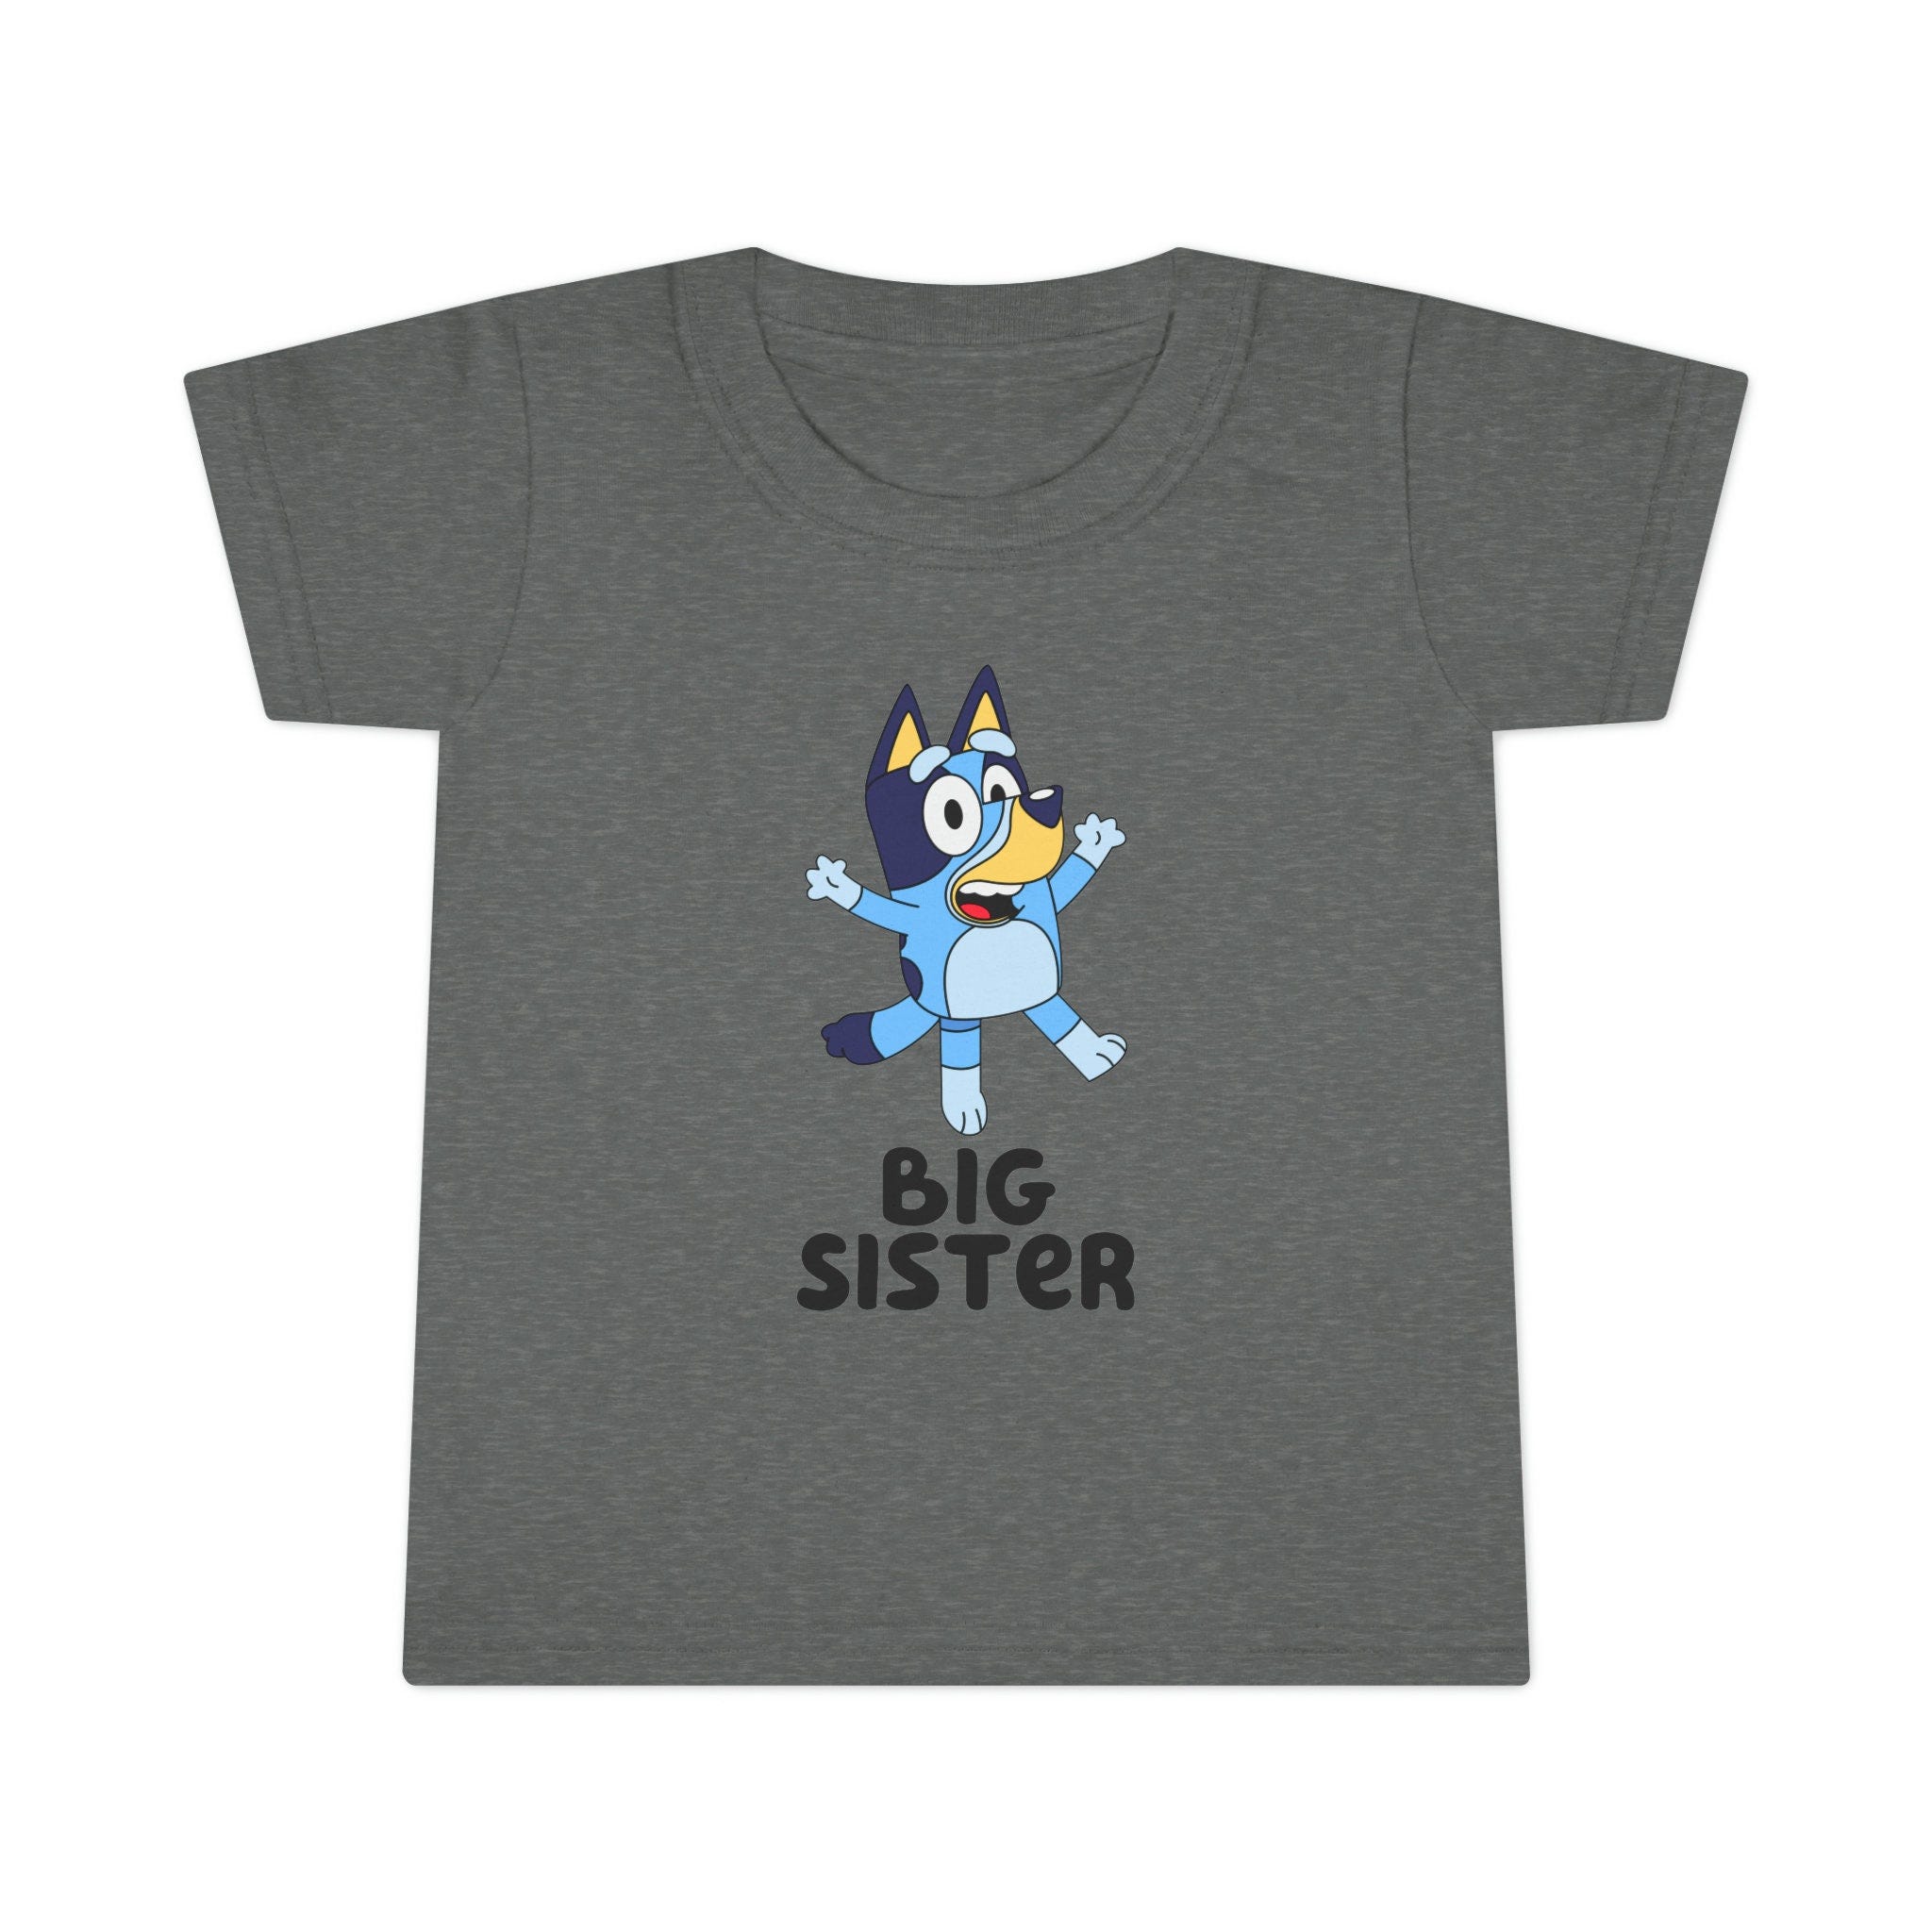 Bluey Big Sister, Bluey and Friends, Birthday, Dance Mode, Party, Bluey Gift -Toddler T-shirt